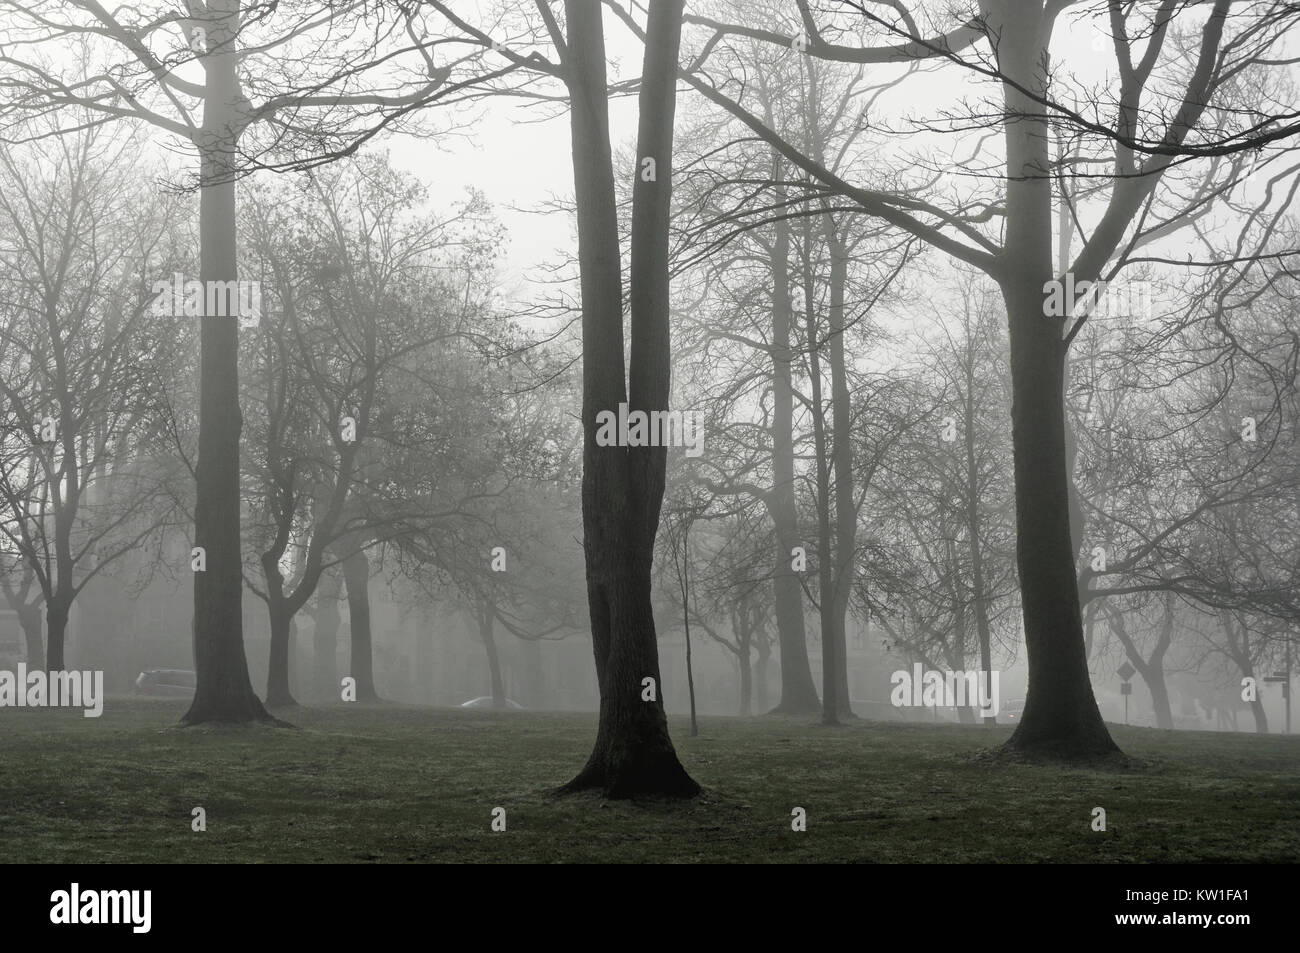 bare-deciduous-trees-on-a-foggy-day-hadd